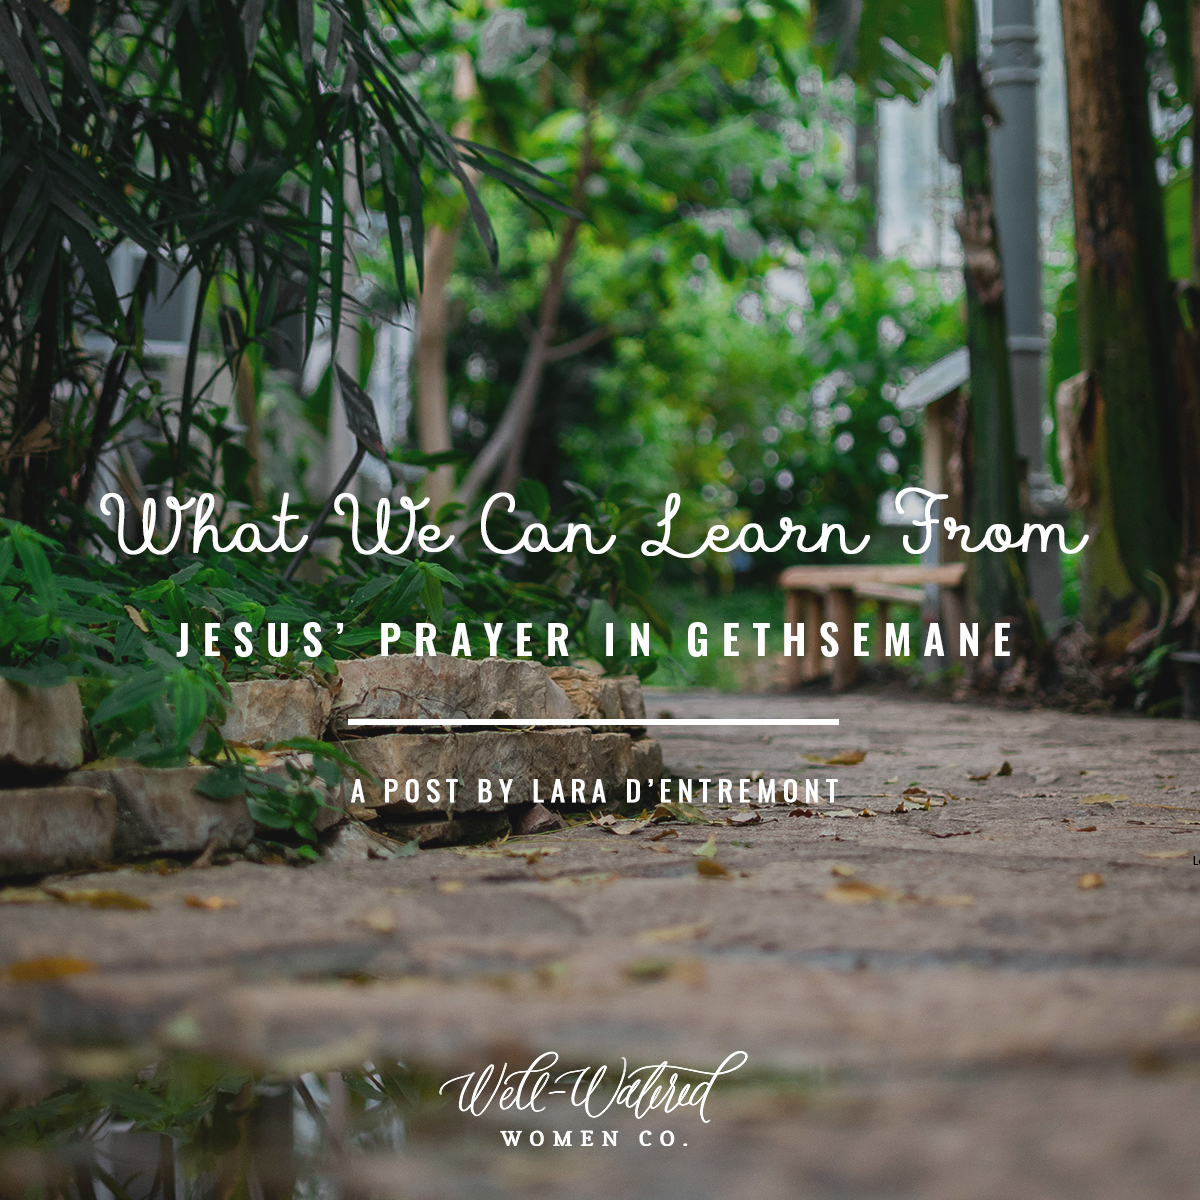 Well-Watered Women Blog-What We Can Learn From Jesus' Prayer in Gethsemane